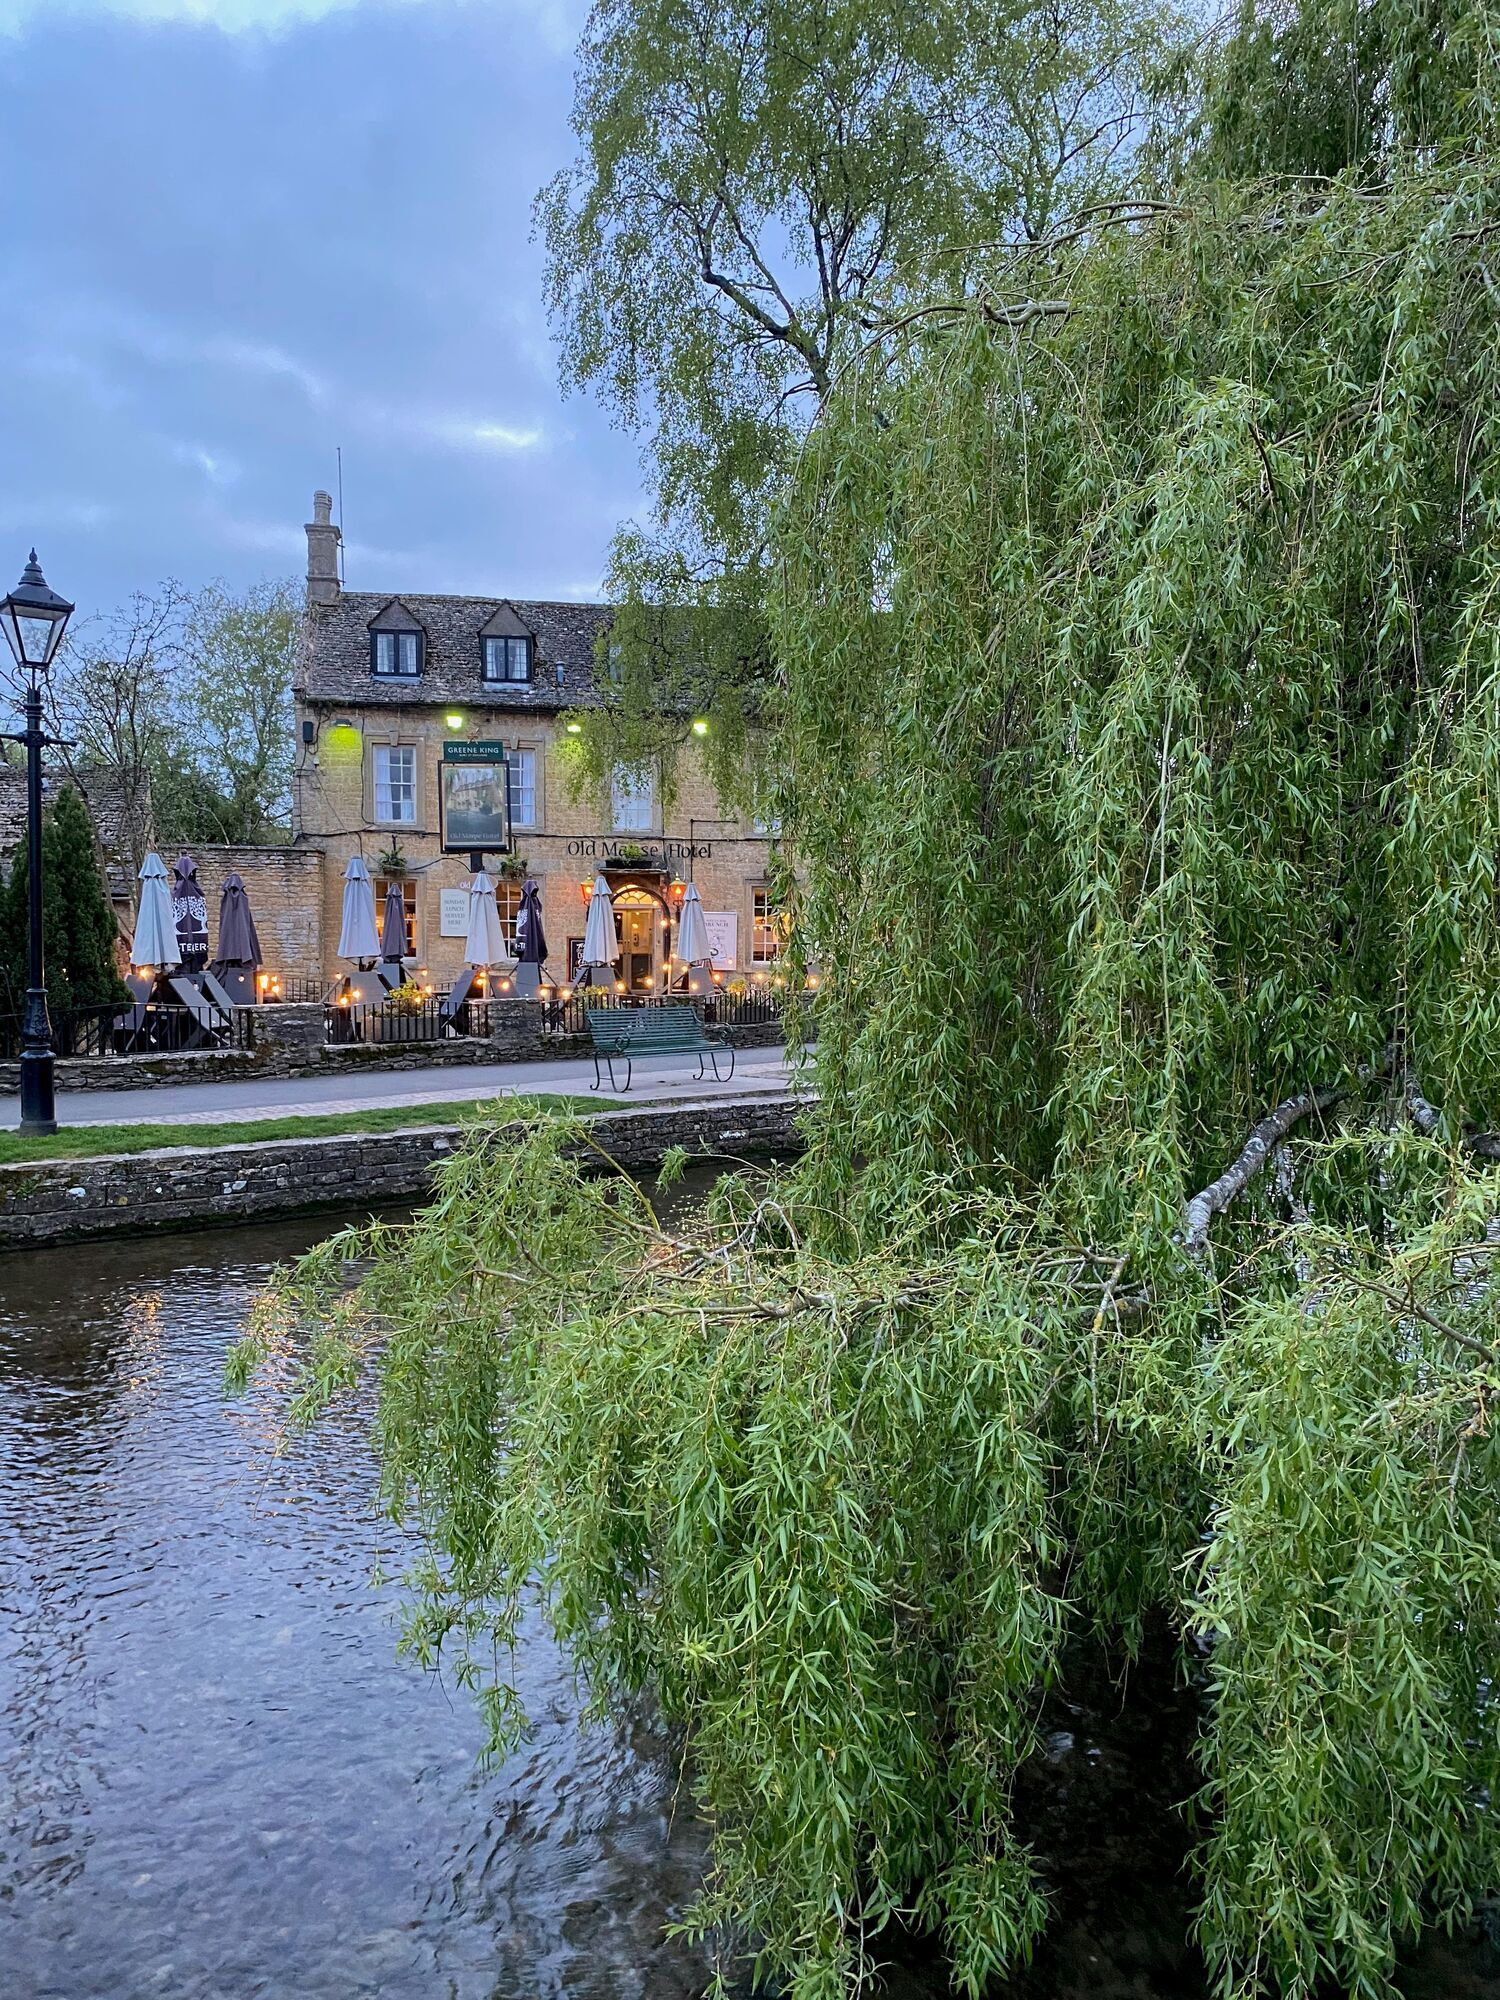 Venice of the Cotswolds: what hides one of the most romantic places in Great Britain, where couples are advised to visit